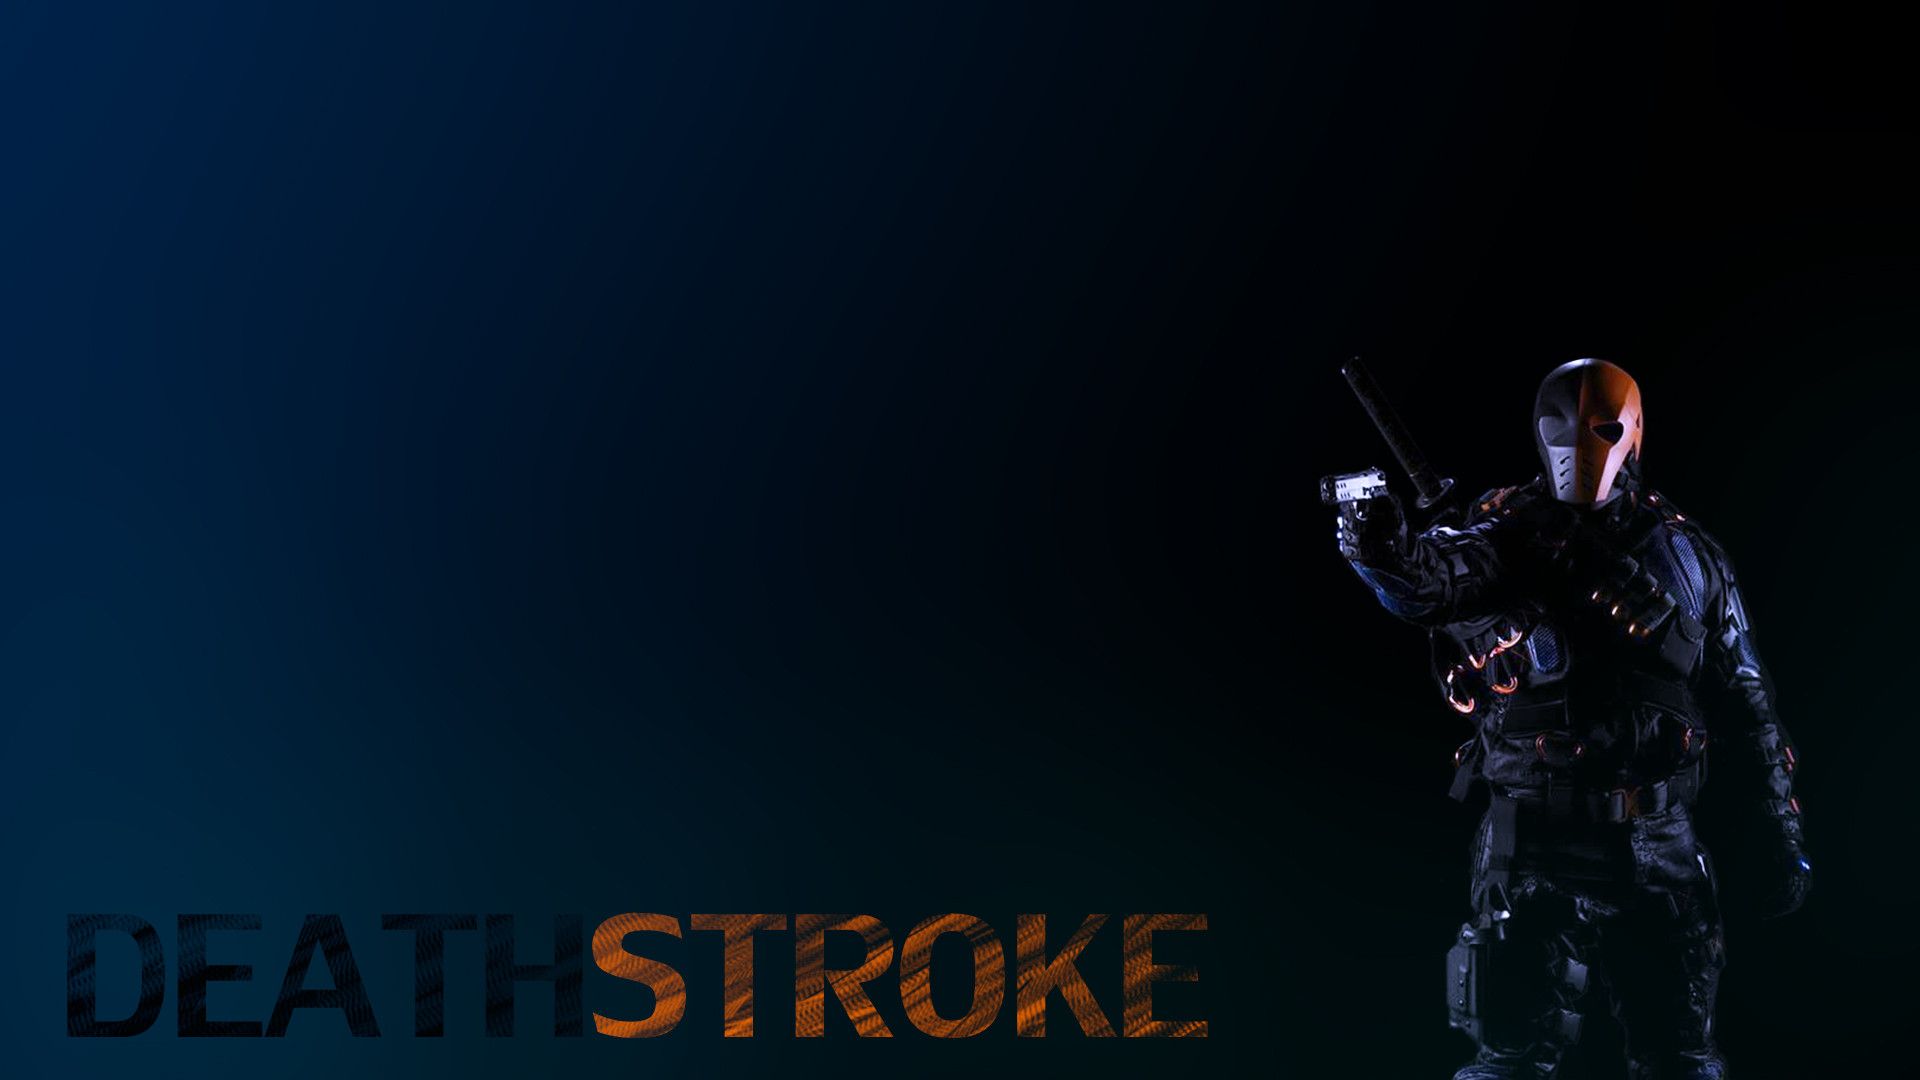 Made a wallpaper from the picture of Deathstroke, requests are ...